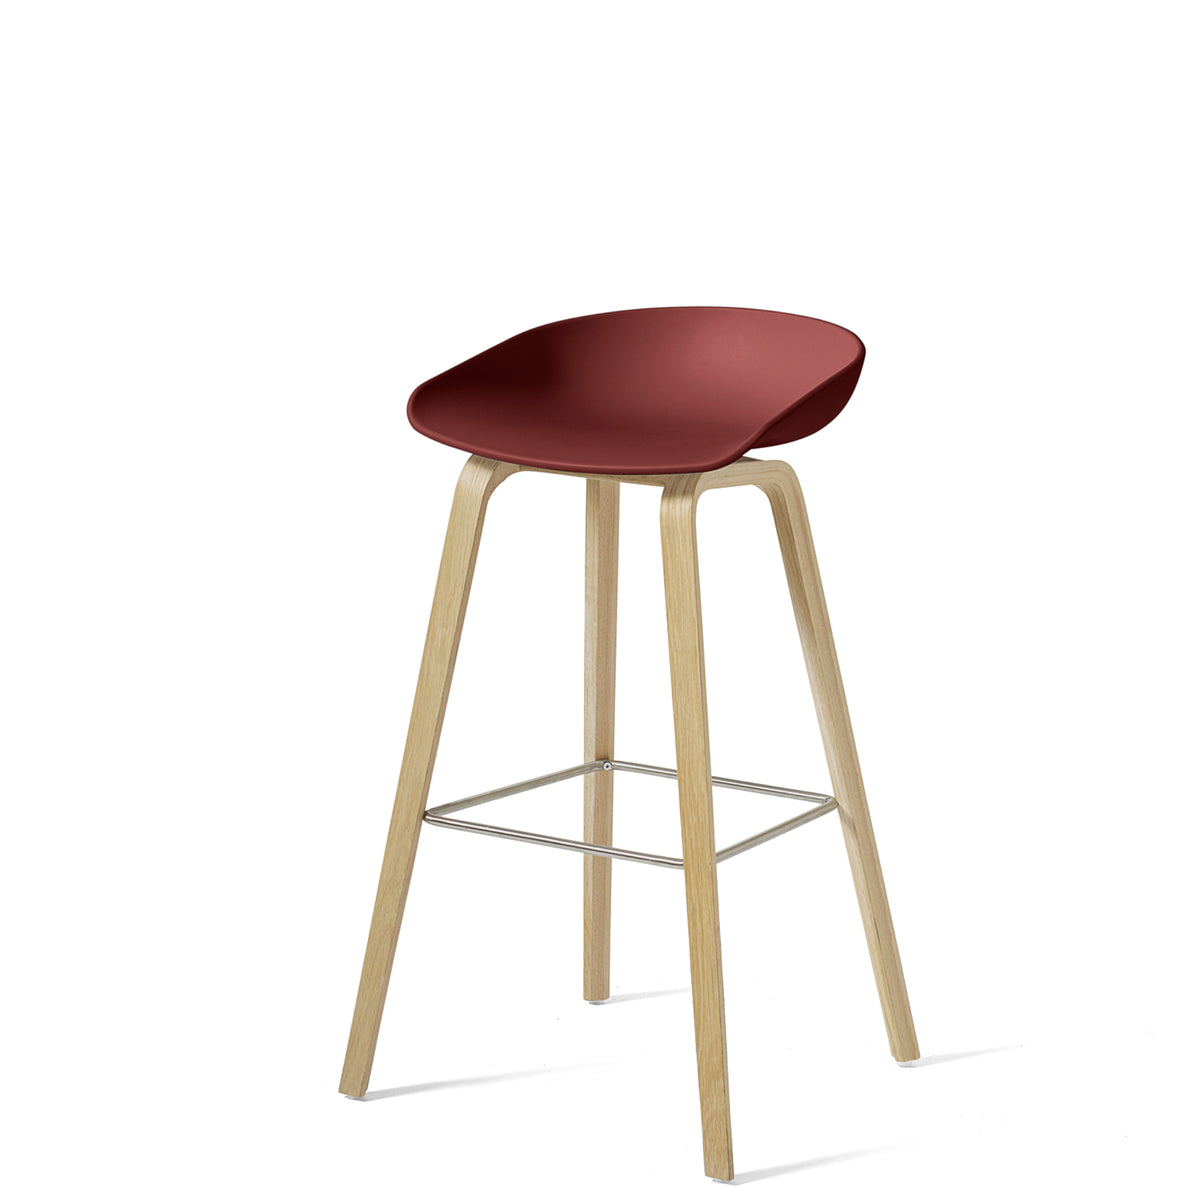 HAY About A Stool AAS32 850mm Brick Matt Lacquered Oak Base